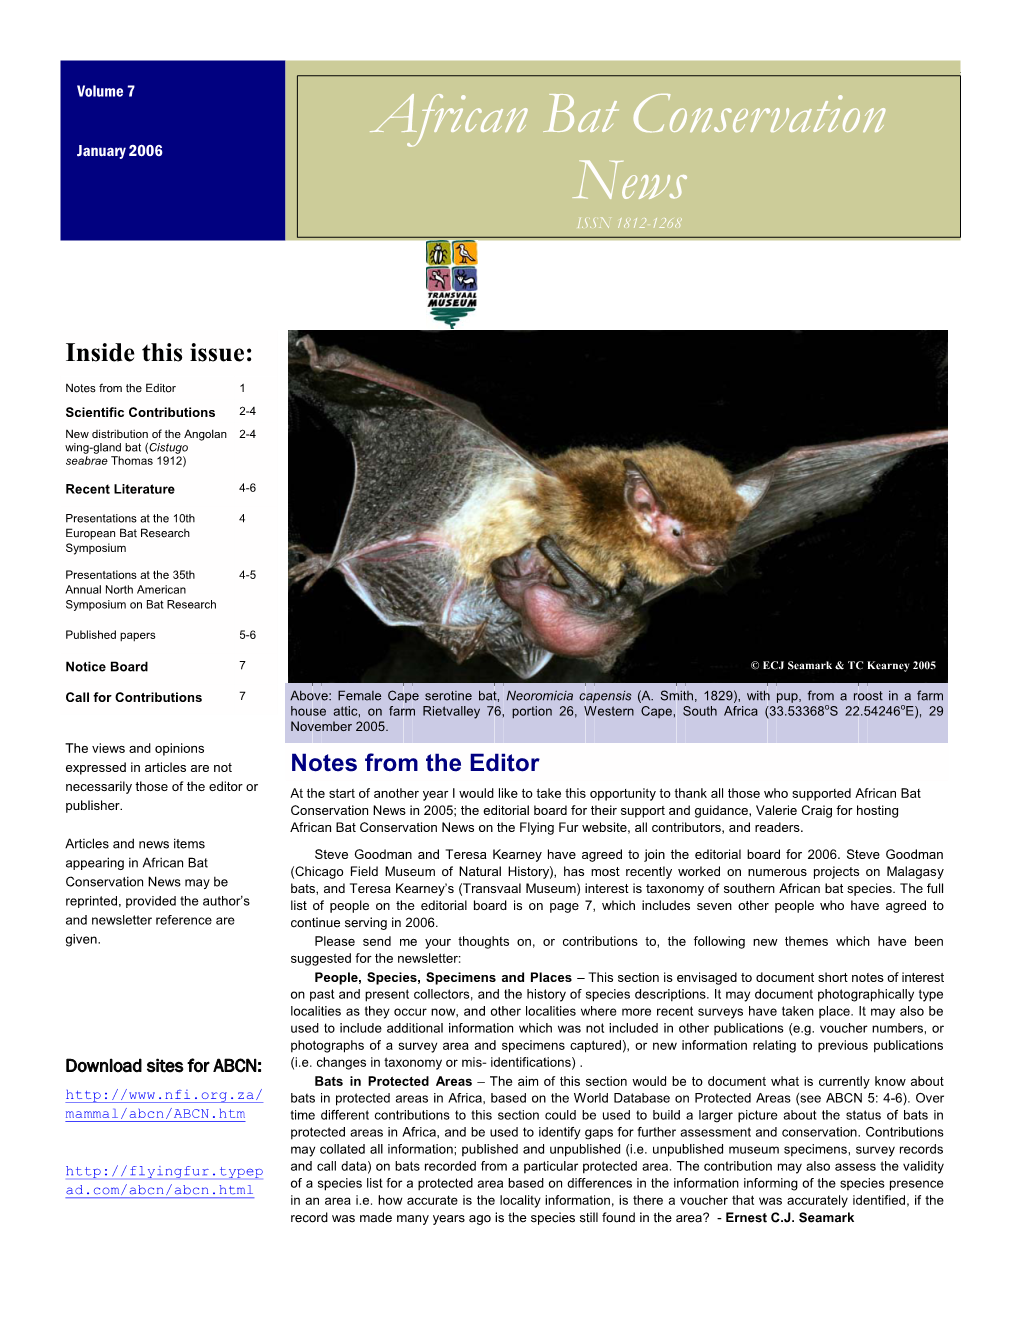 African Bat Conservation News on the Flying Fur Website, All Contributors, and Readers